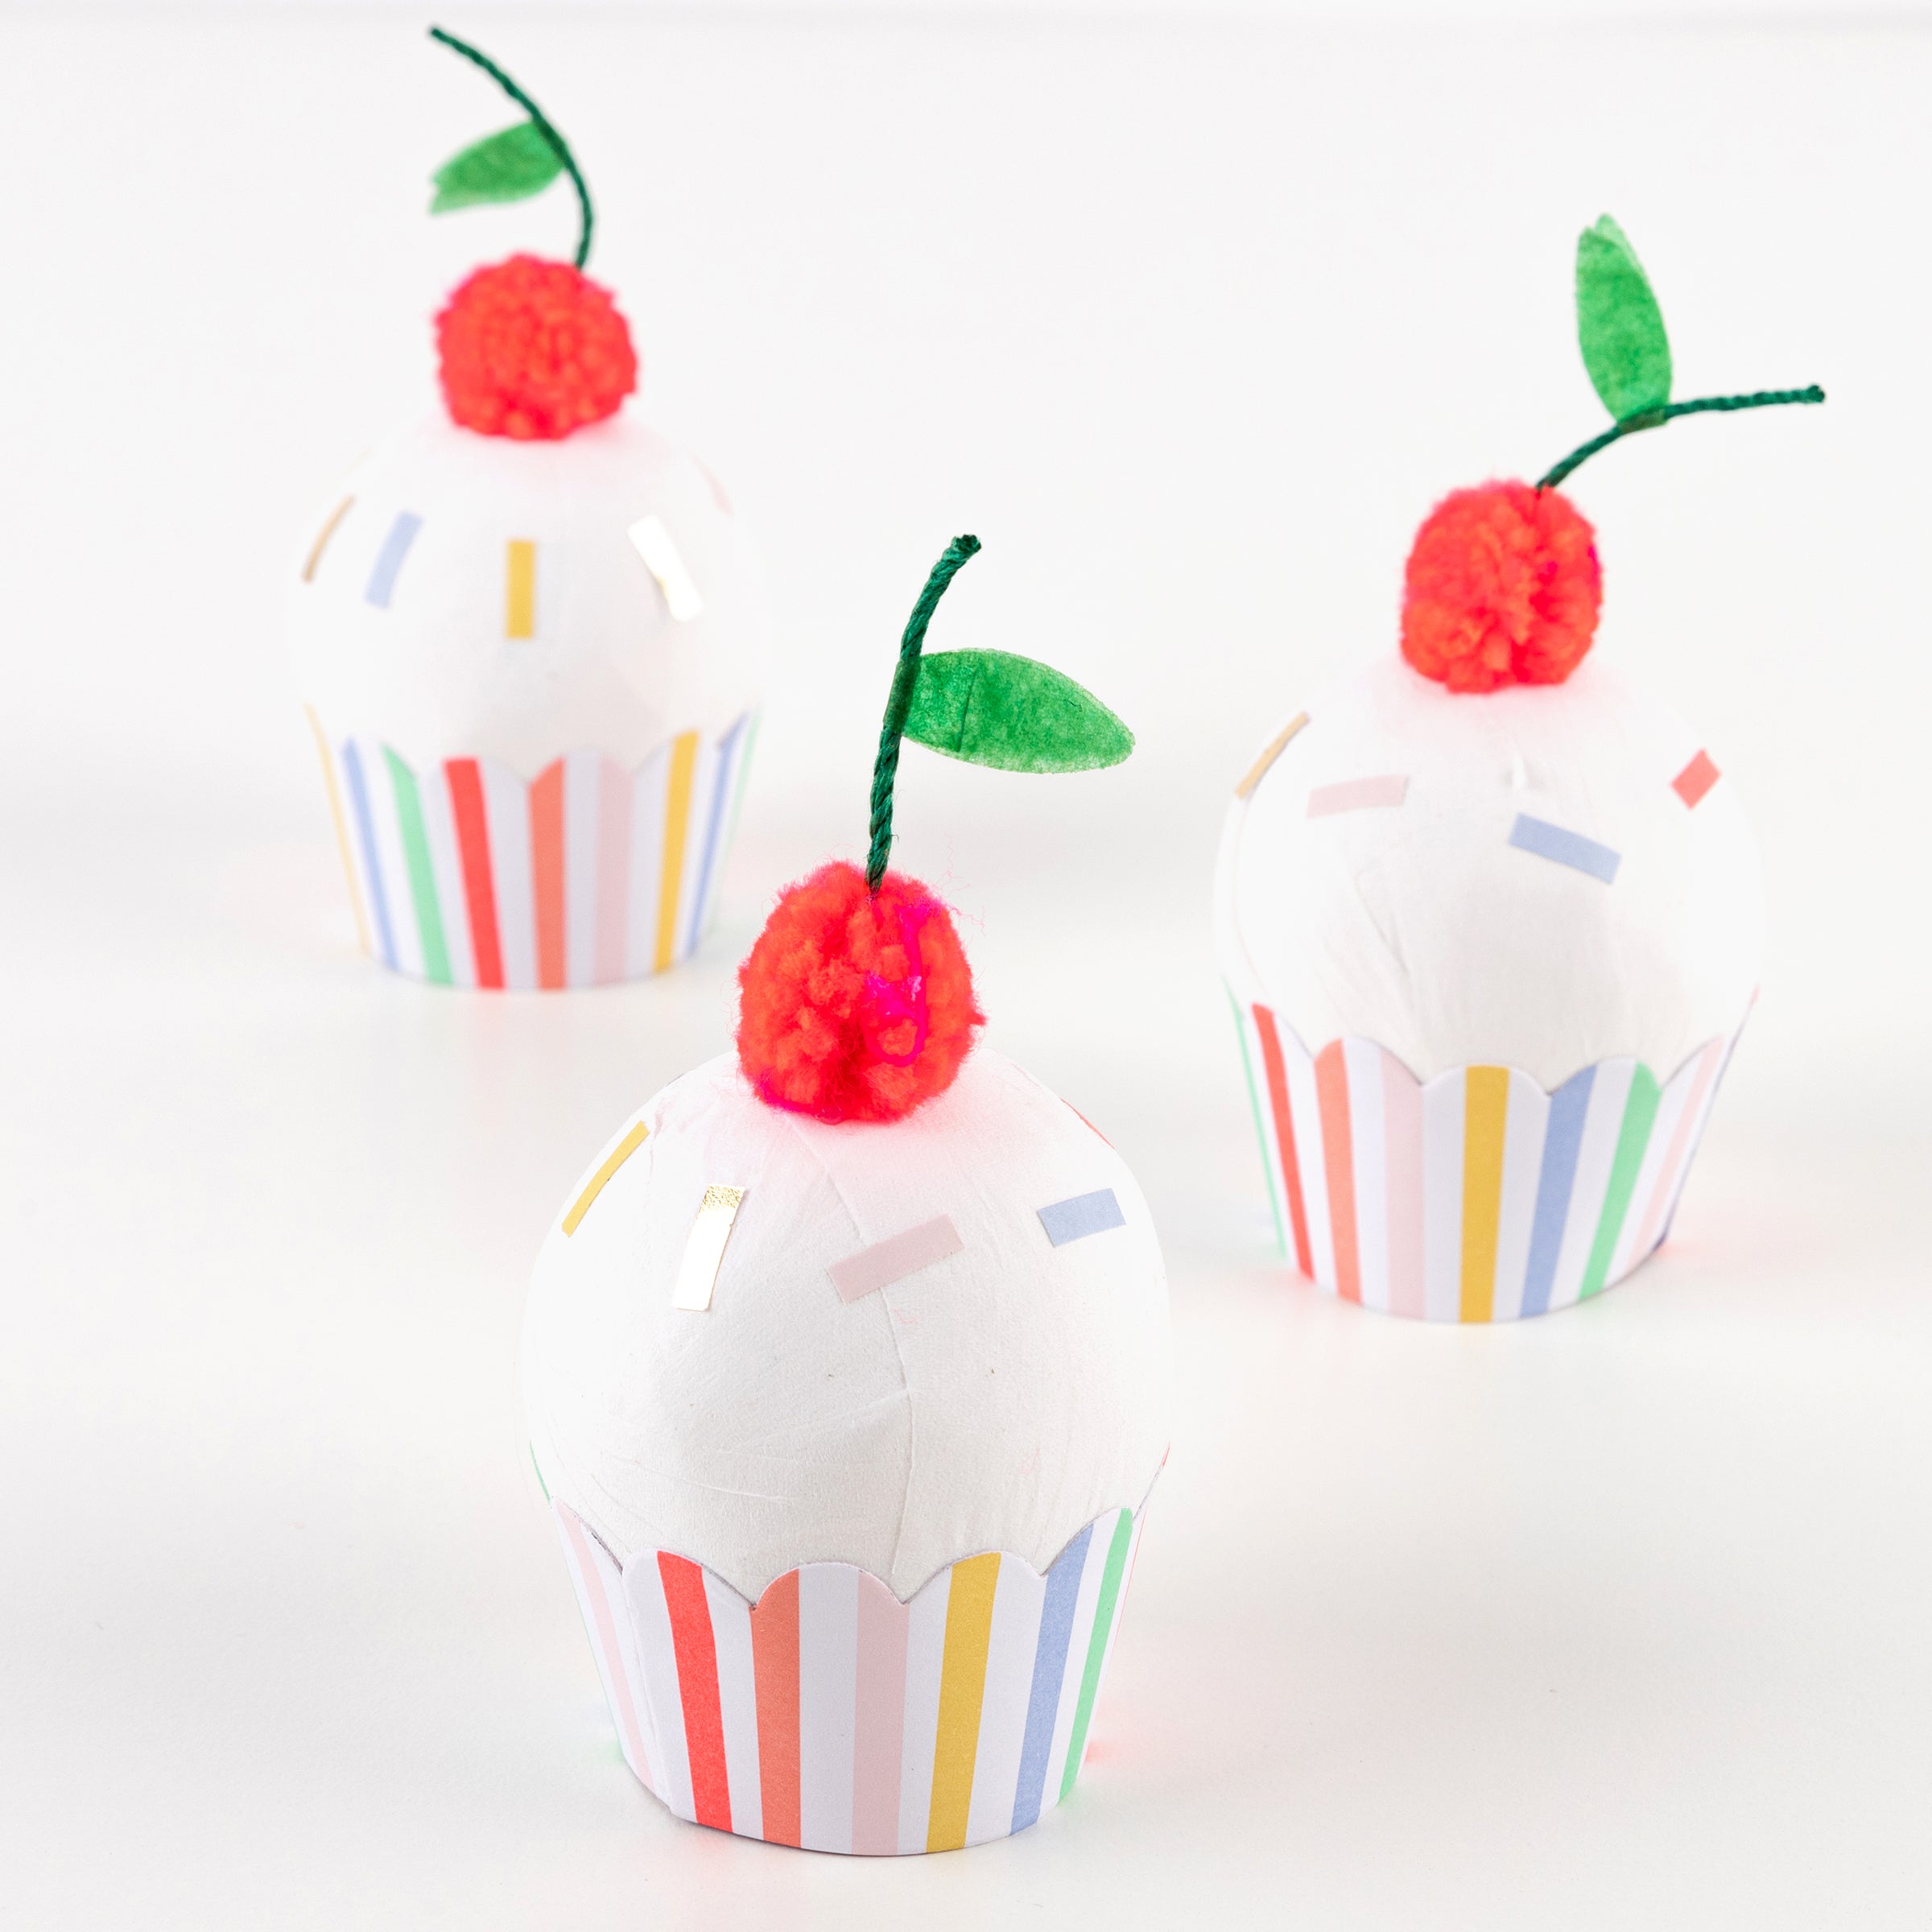 This party favors are cleverly crafted to look like cupcakes, and contain temporary tattoos for kids and friendship bracelets.